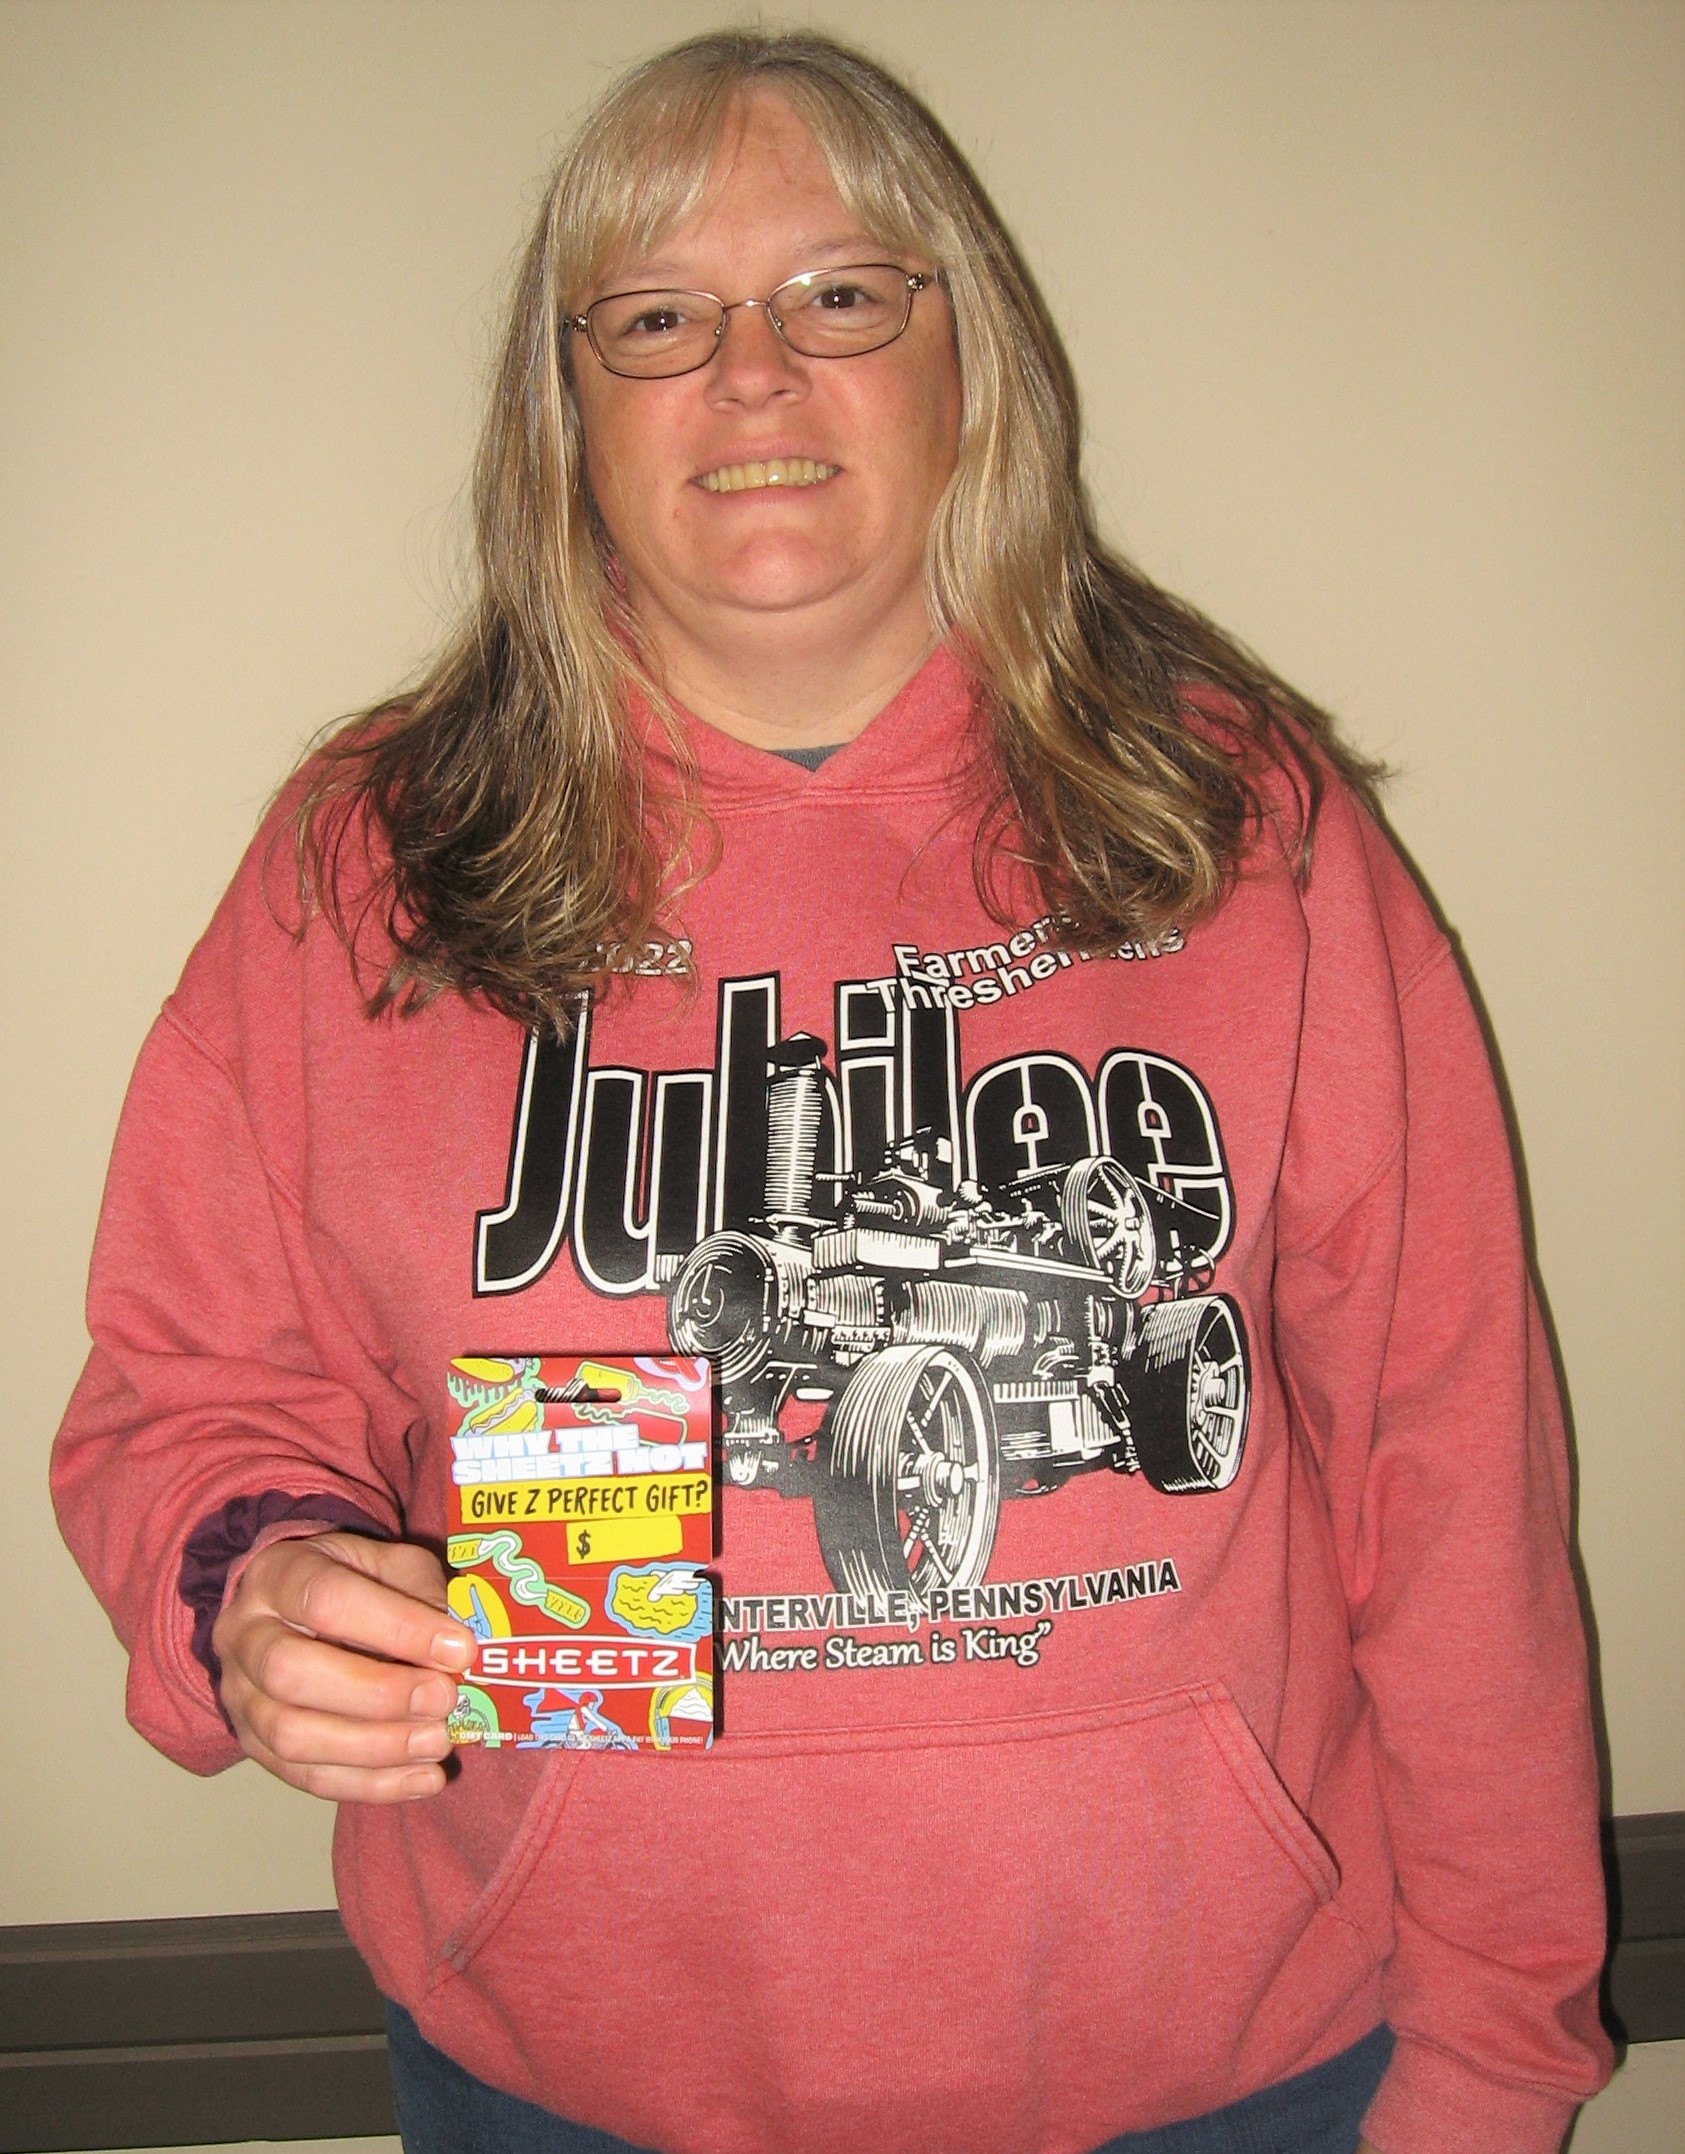 An older blonde woman with glasses and a pink shirt, holding a gift card